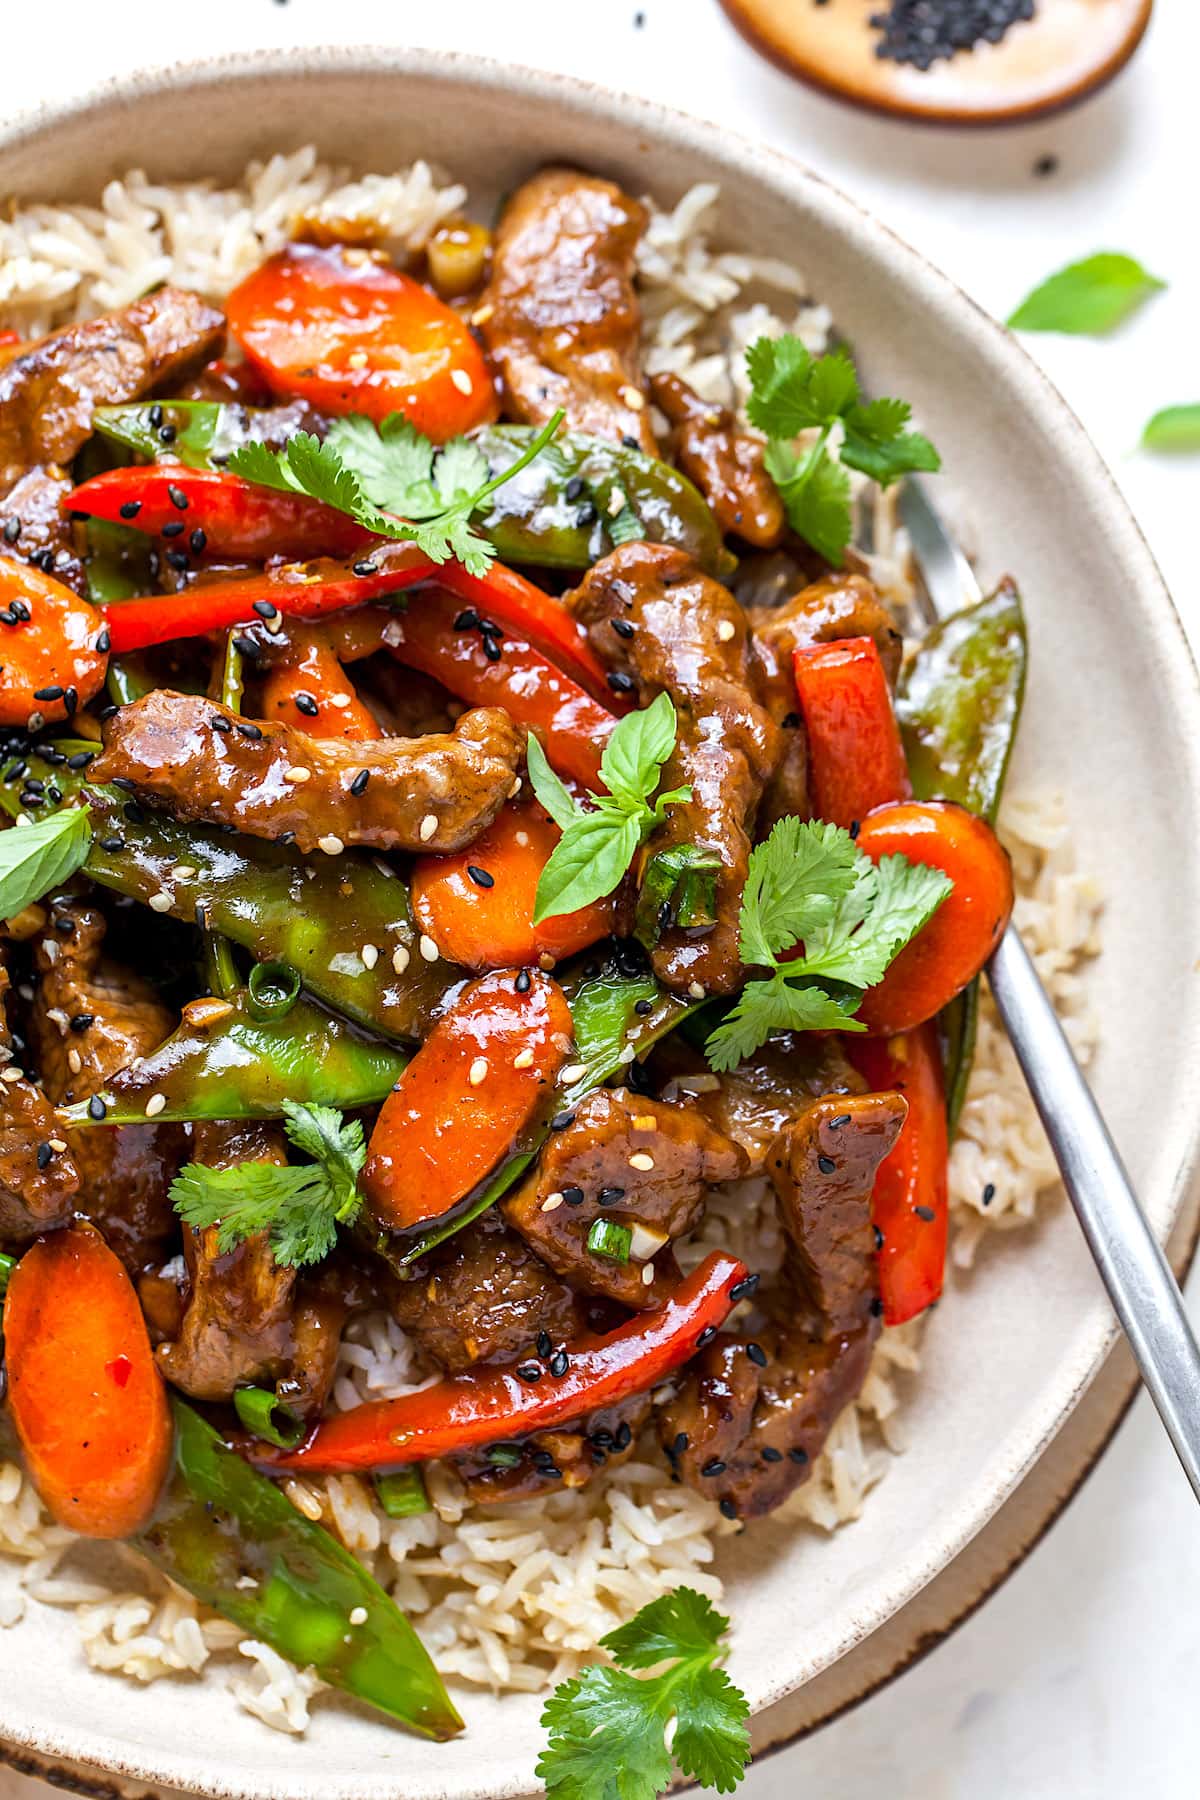 close up of beef stir fry with vegetables and herbs in bowl with rice and fork.